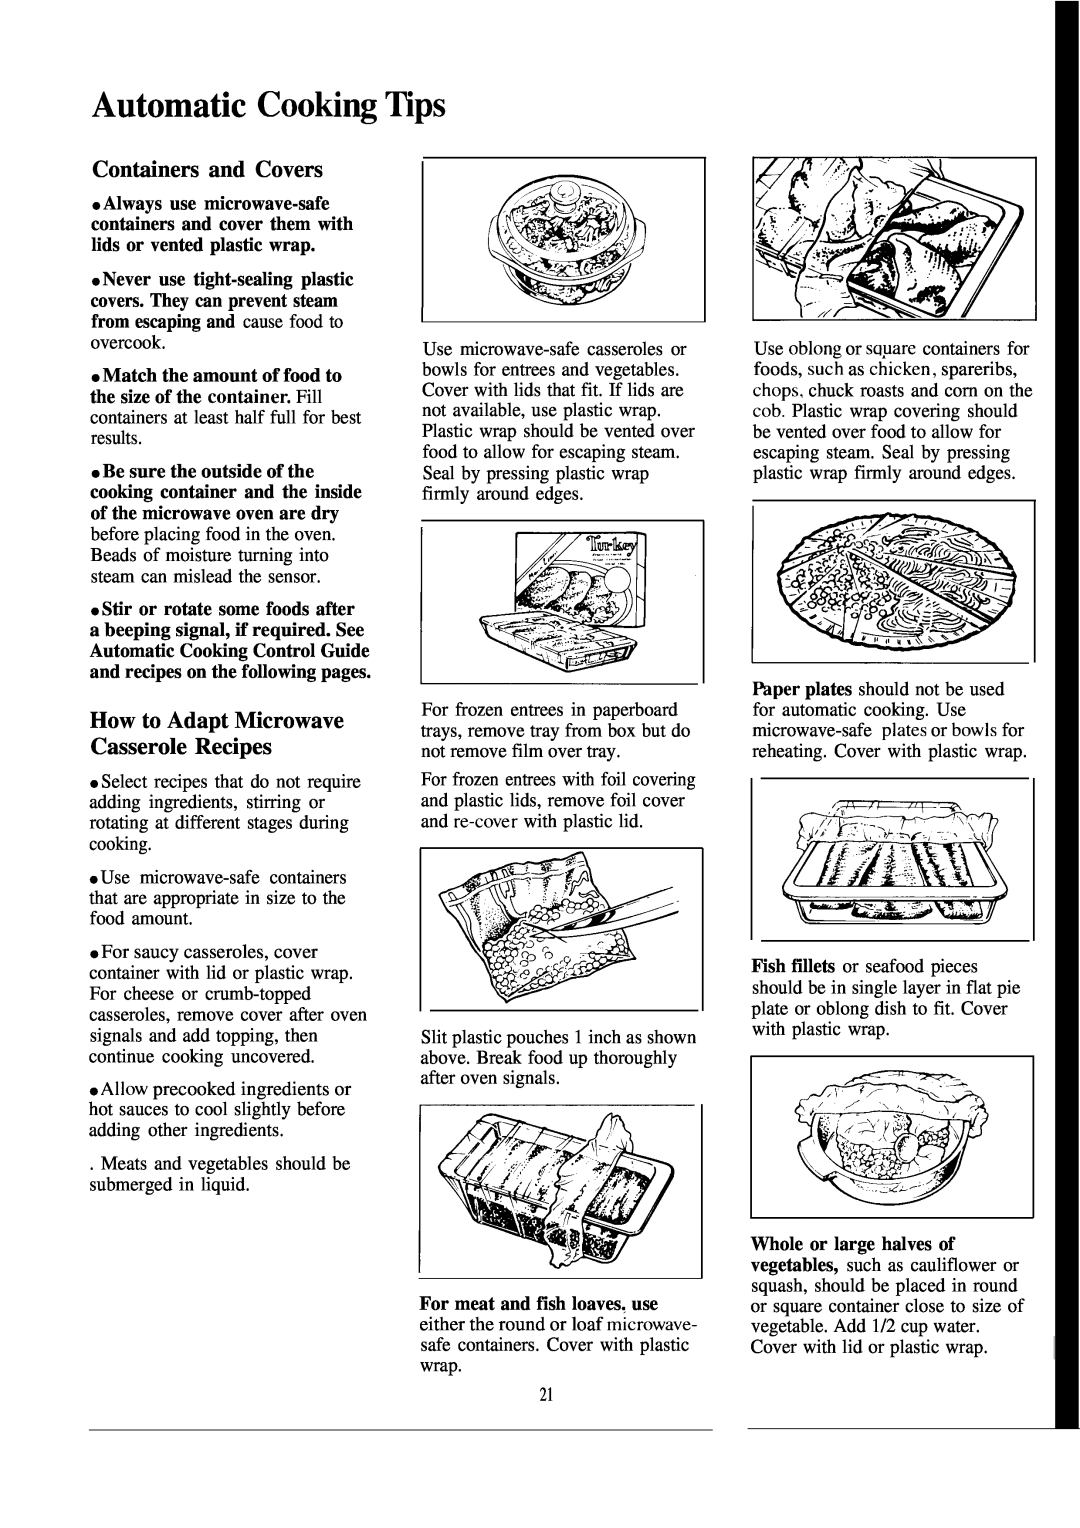 GE JVM152J manual Automatic Cooting ~ps, Containers and Covers, How to Adapt Microwave Casserole Recipes 